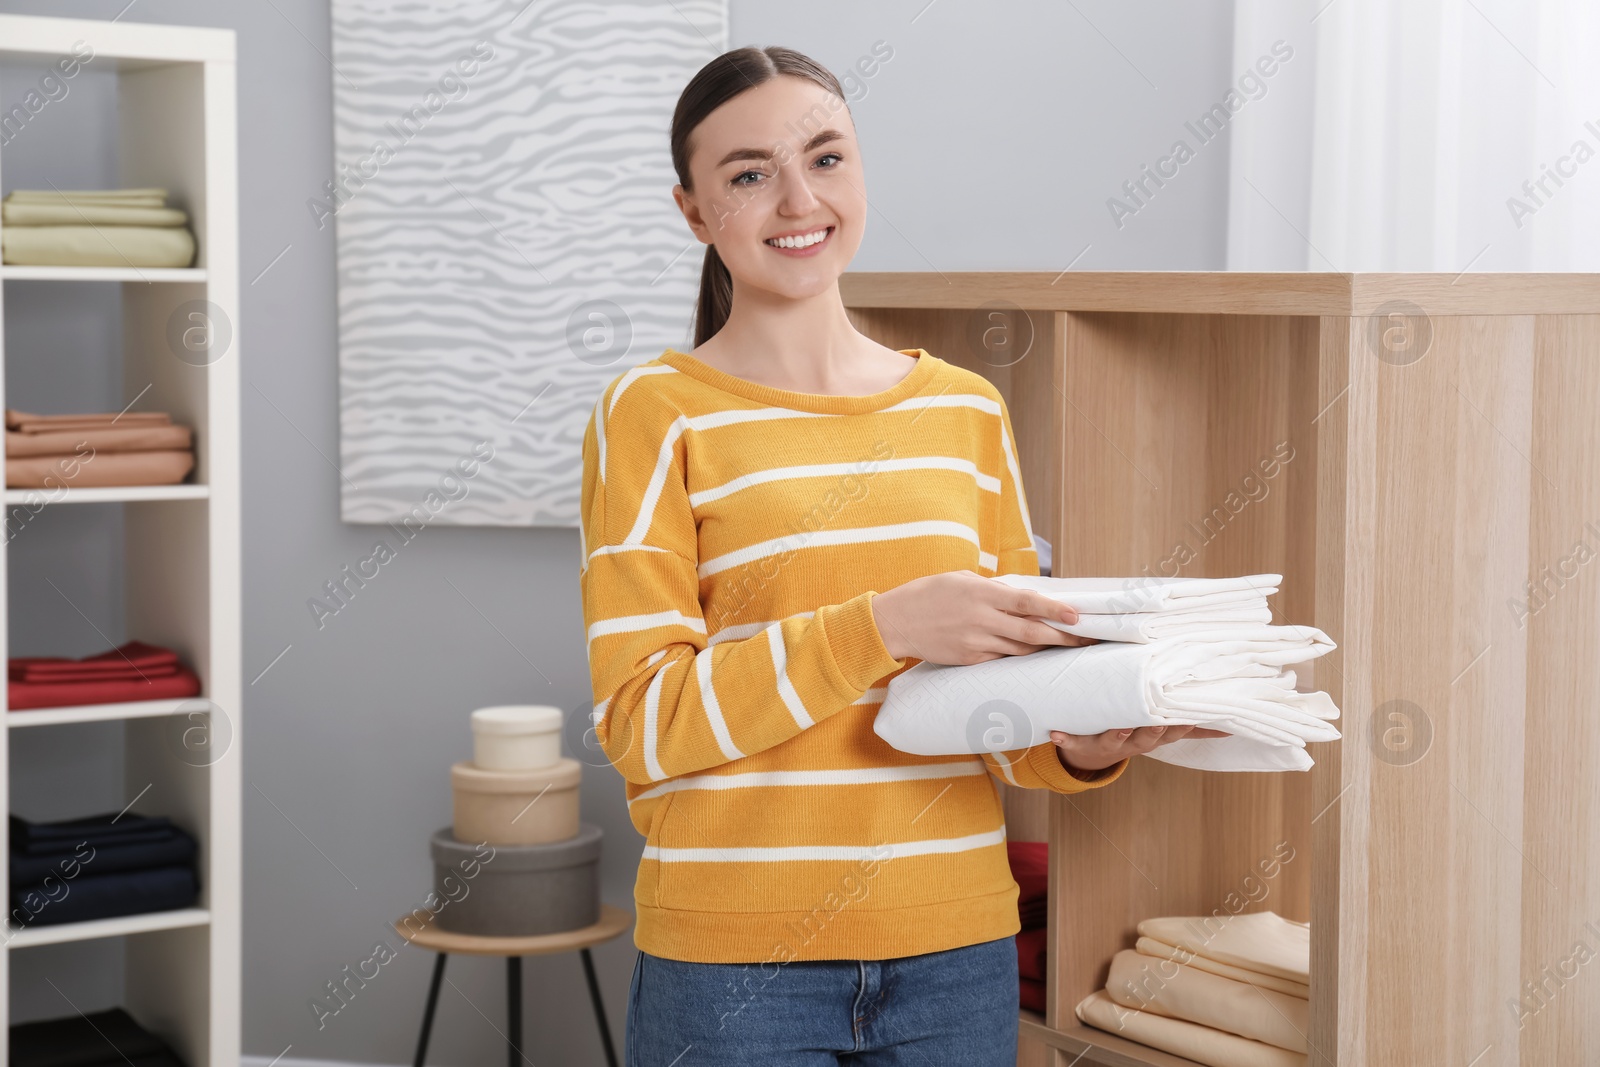 Photo of Smiling young woman with bed linens in shop